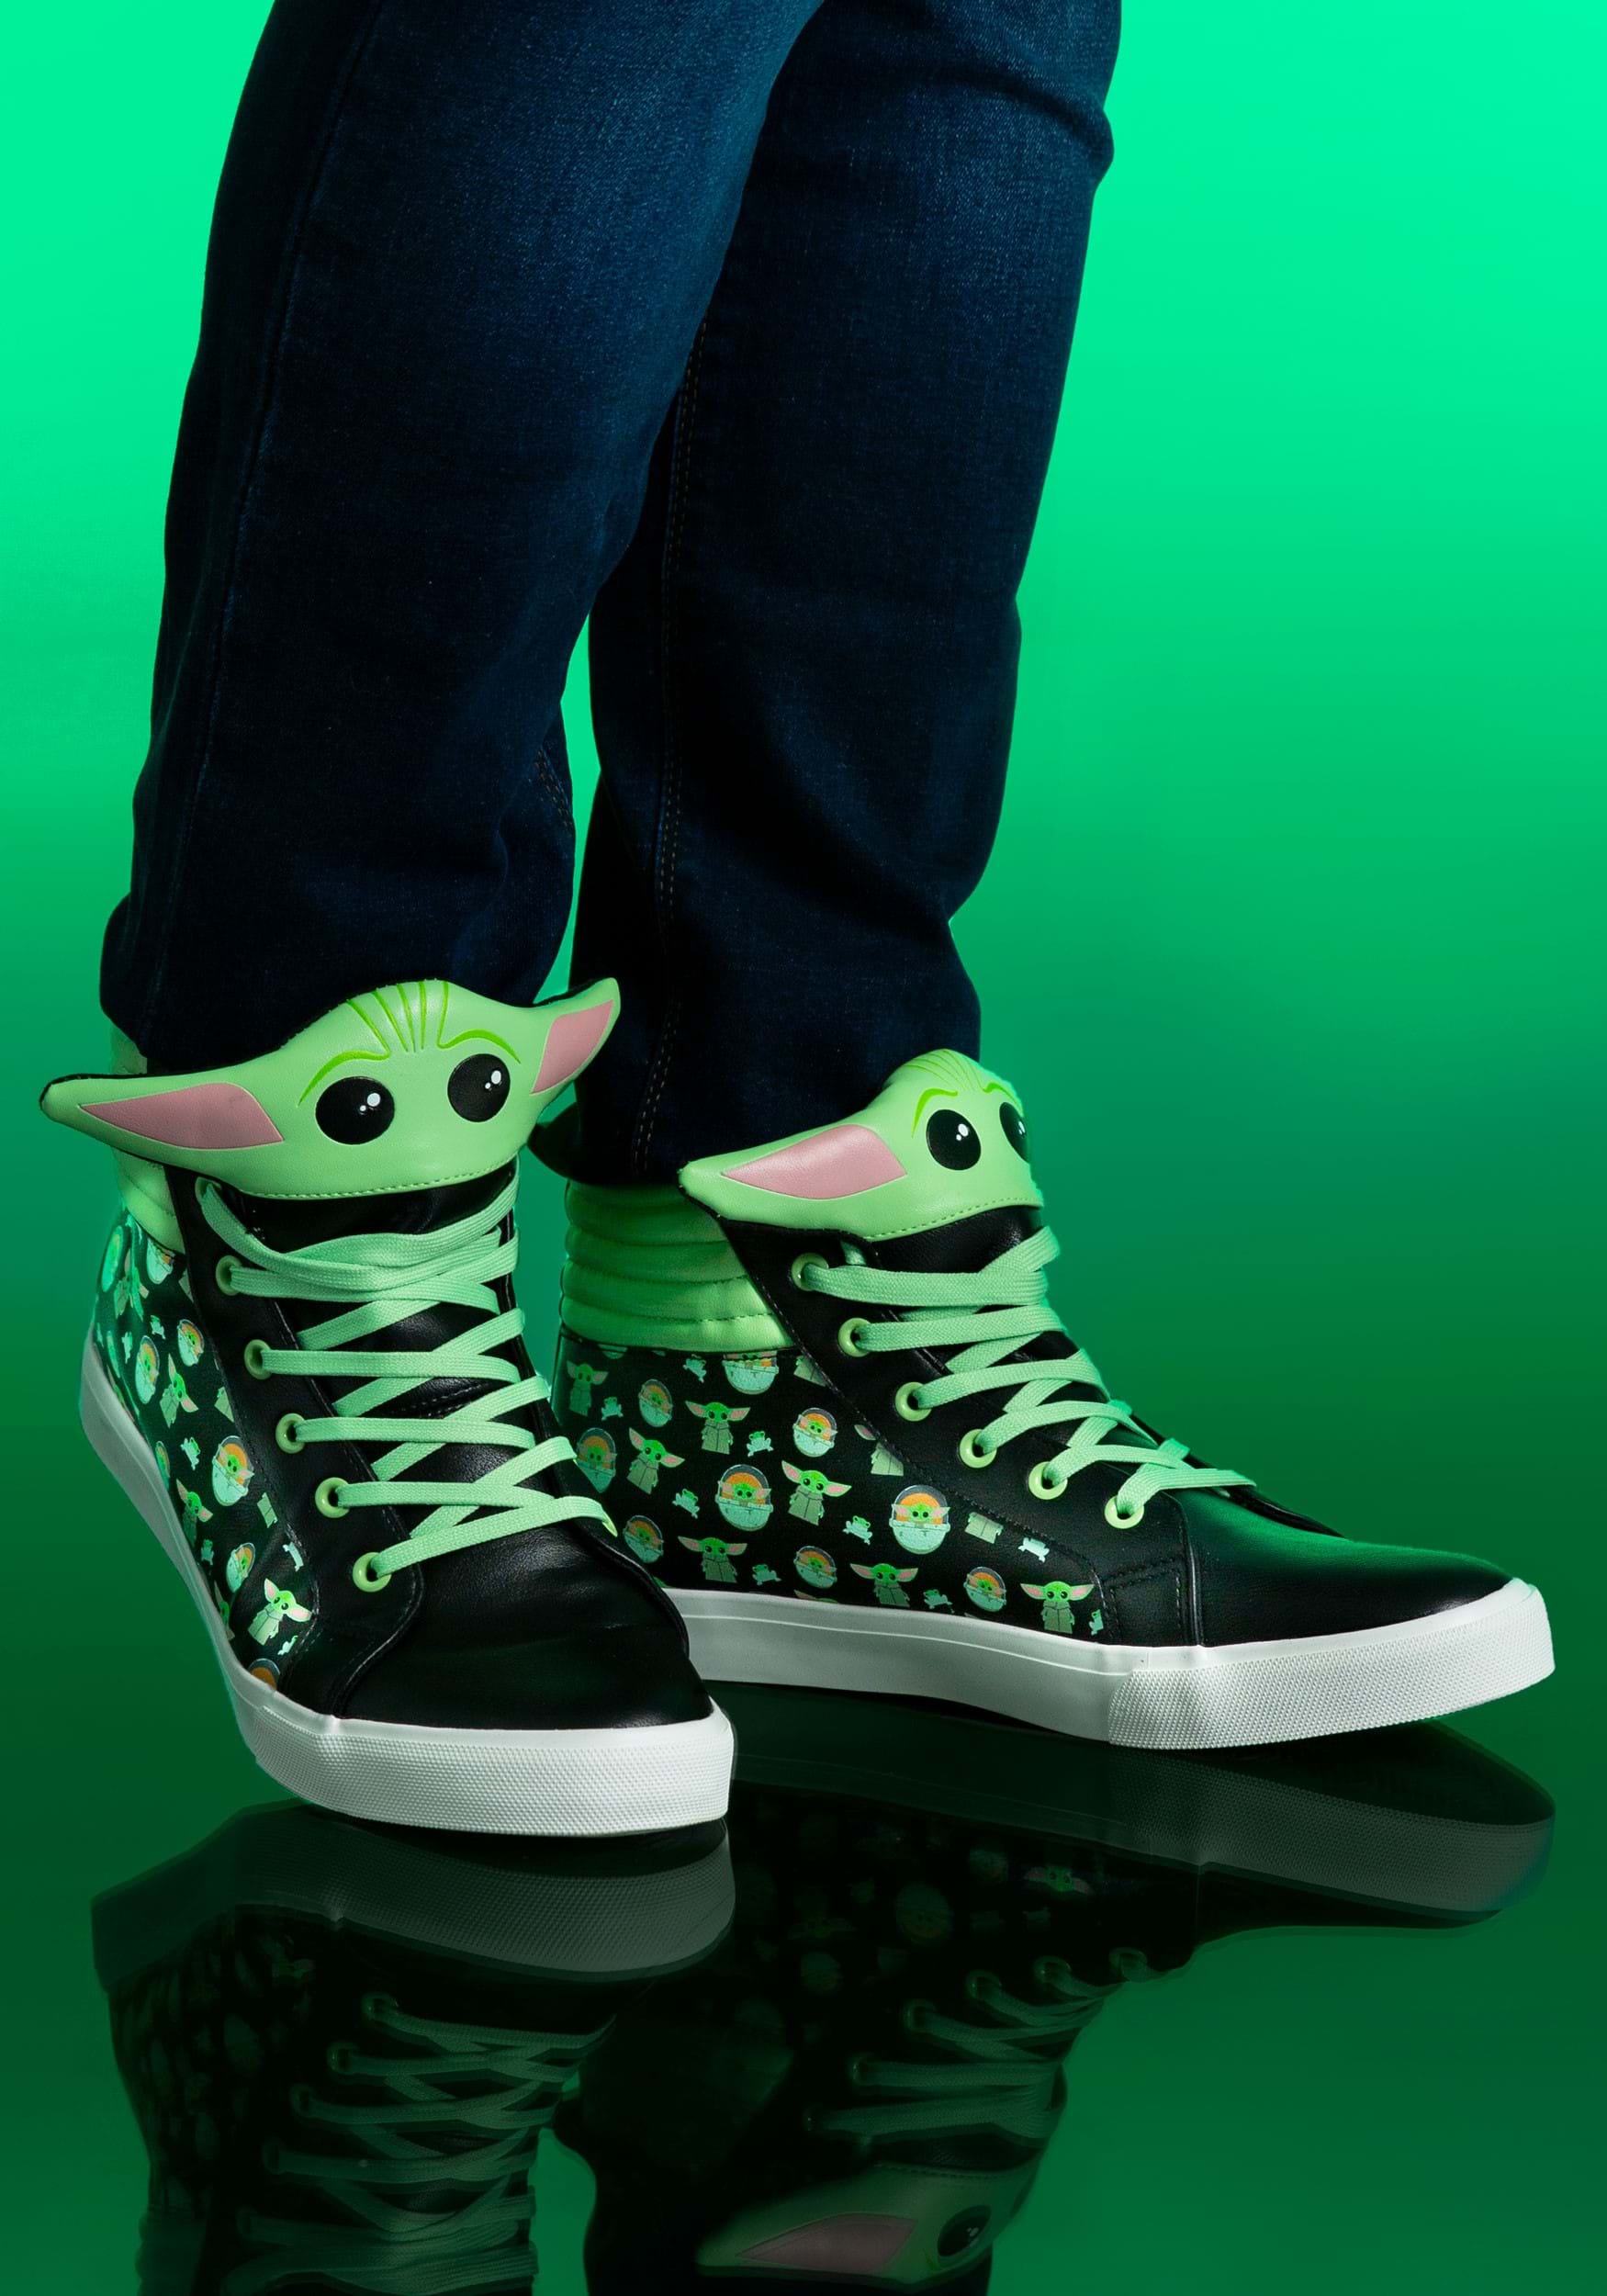 Step Into Galactic Style With These Fun Baby Yoda Sneakers